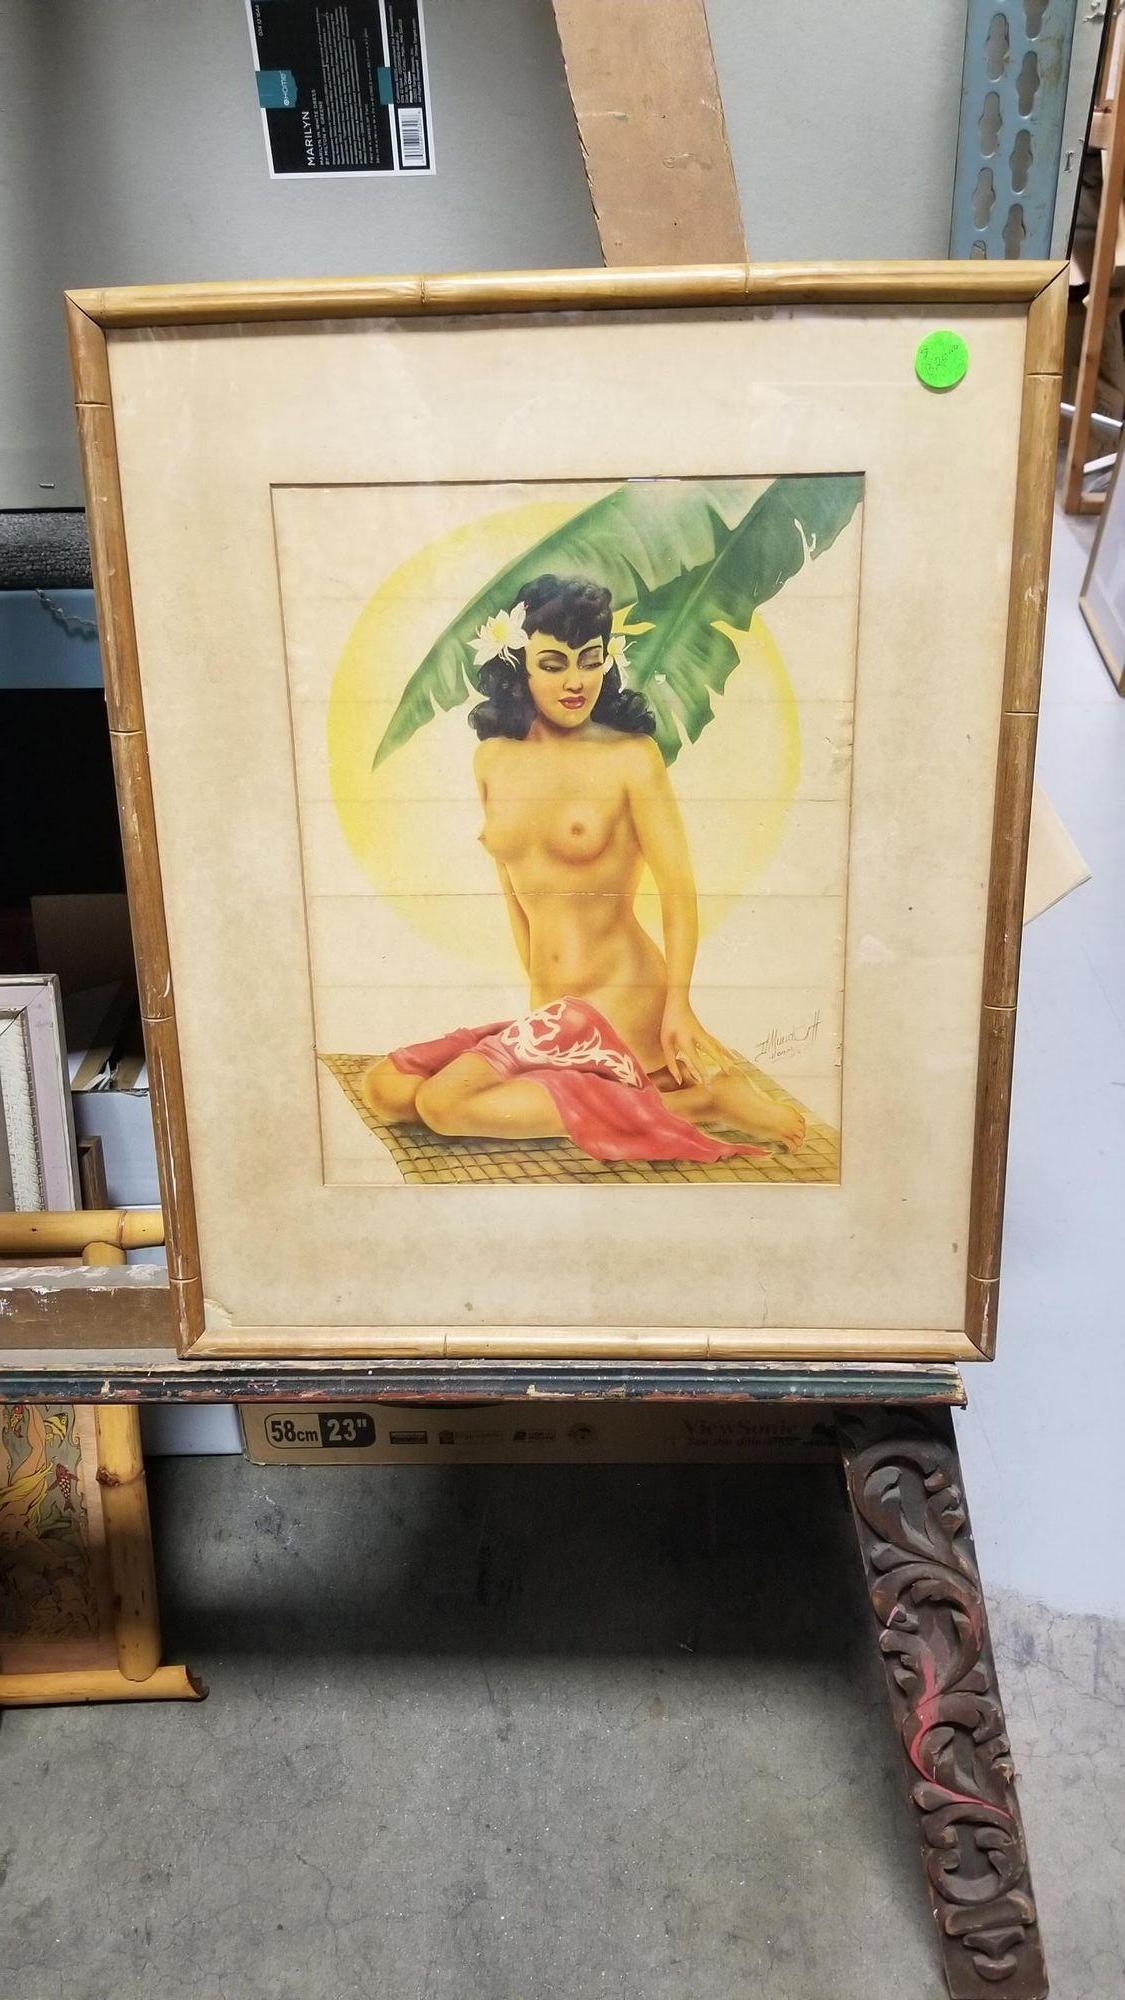 Early Mid-century WWII wartime Hawaiian airbrush artwork nude featuring young topless women on an island beach with a palm tree overhead. The airbrush was done on Paper signed by the artist Mundorff Honolulu and dated 1945, and is displayed in its